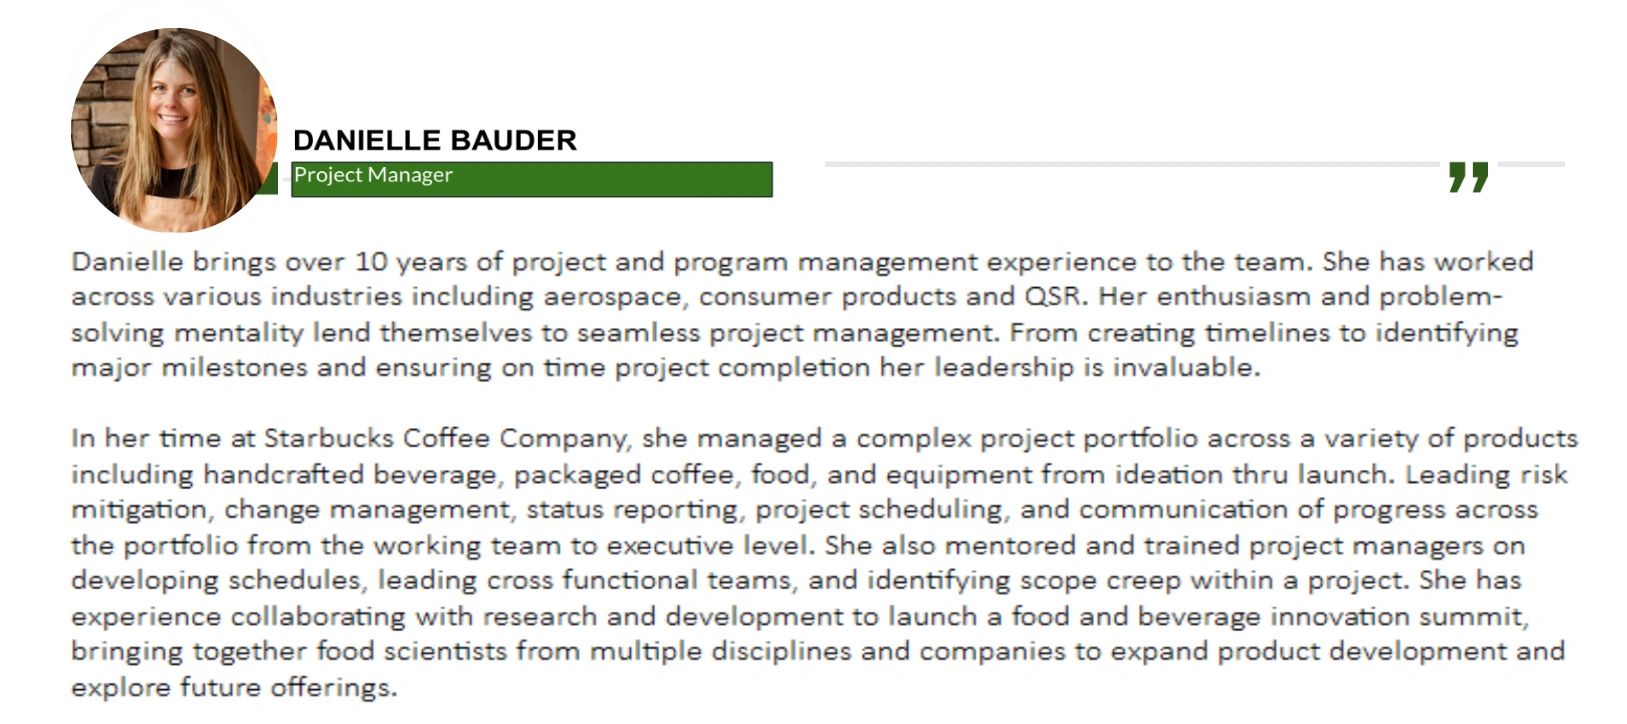 Danielle Bauder, Project Manager at F&B Consulting, specializes in QSR and CPG.